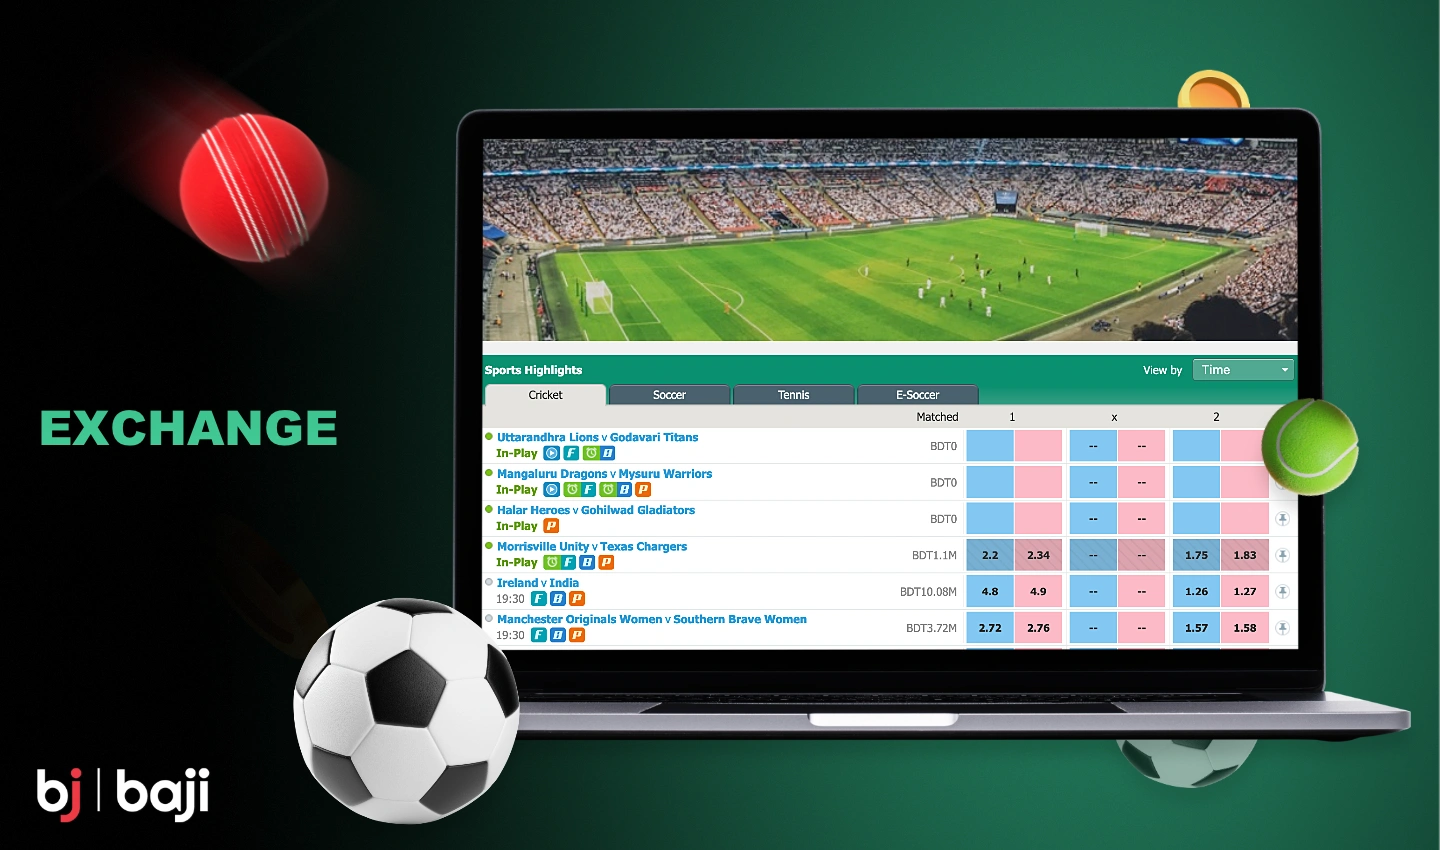 The betting exchange in Baji is particularly popular among users from all over the world